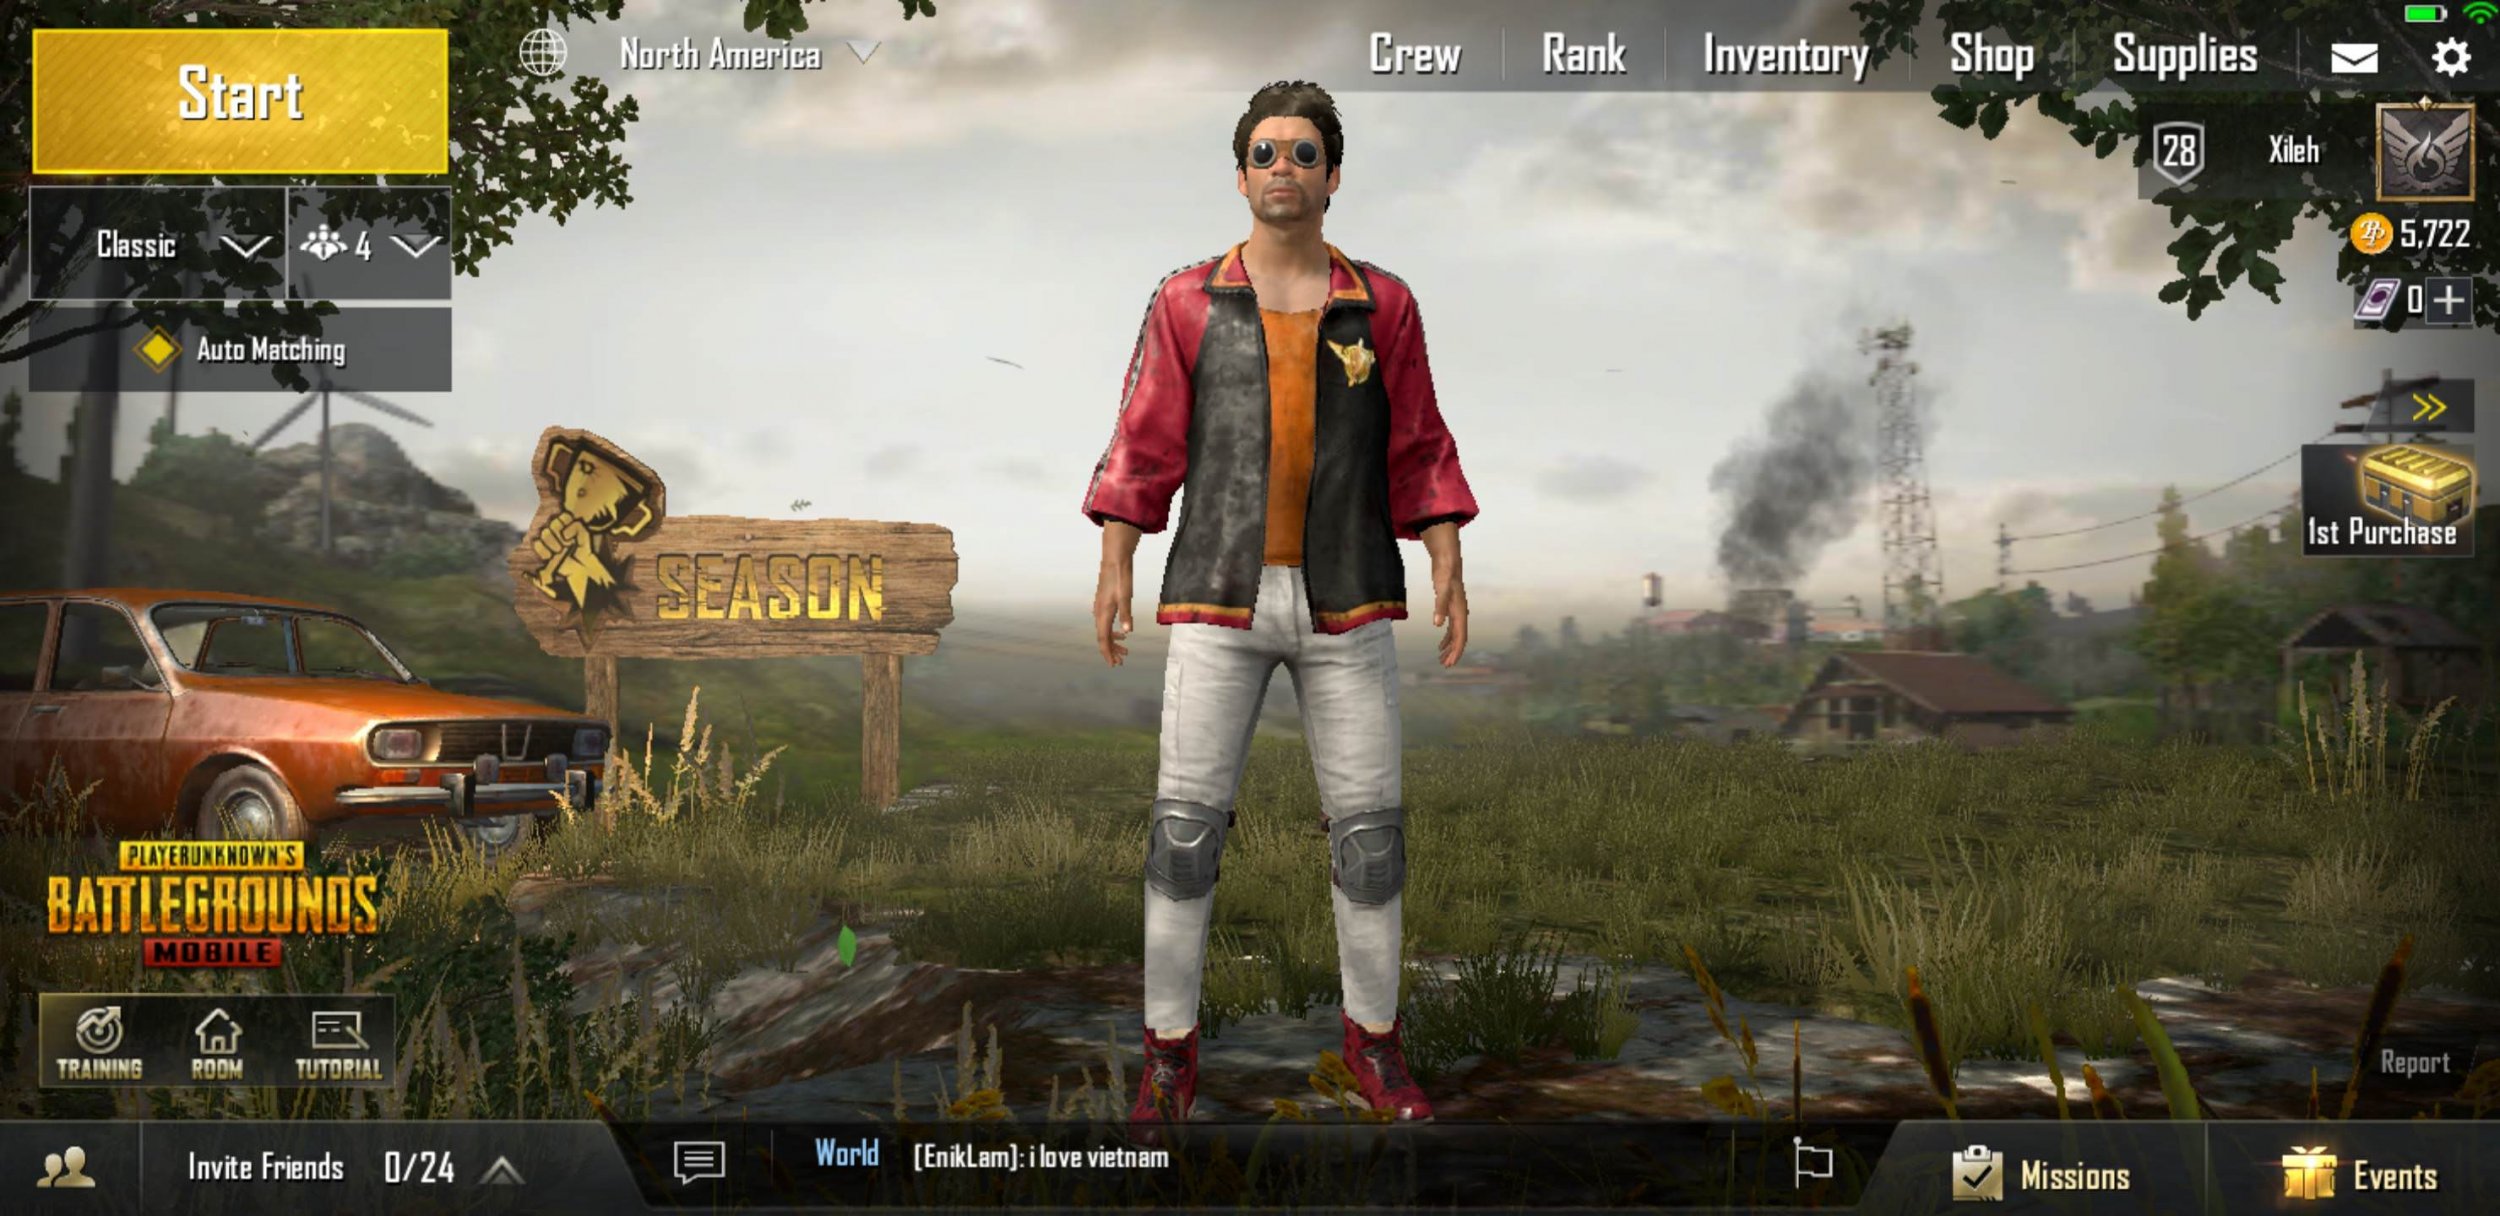 How To Lean In Pubg Mobile - Pubg Freezing - 